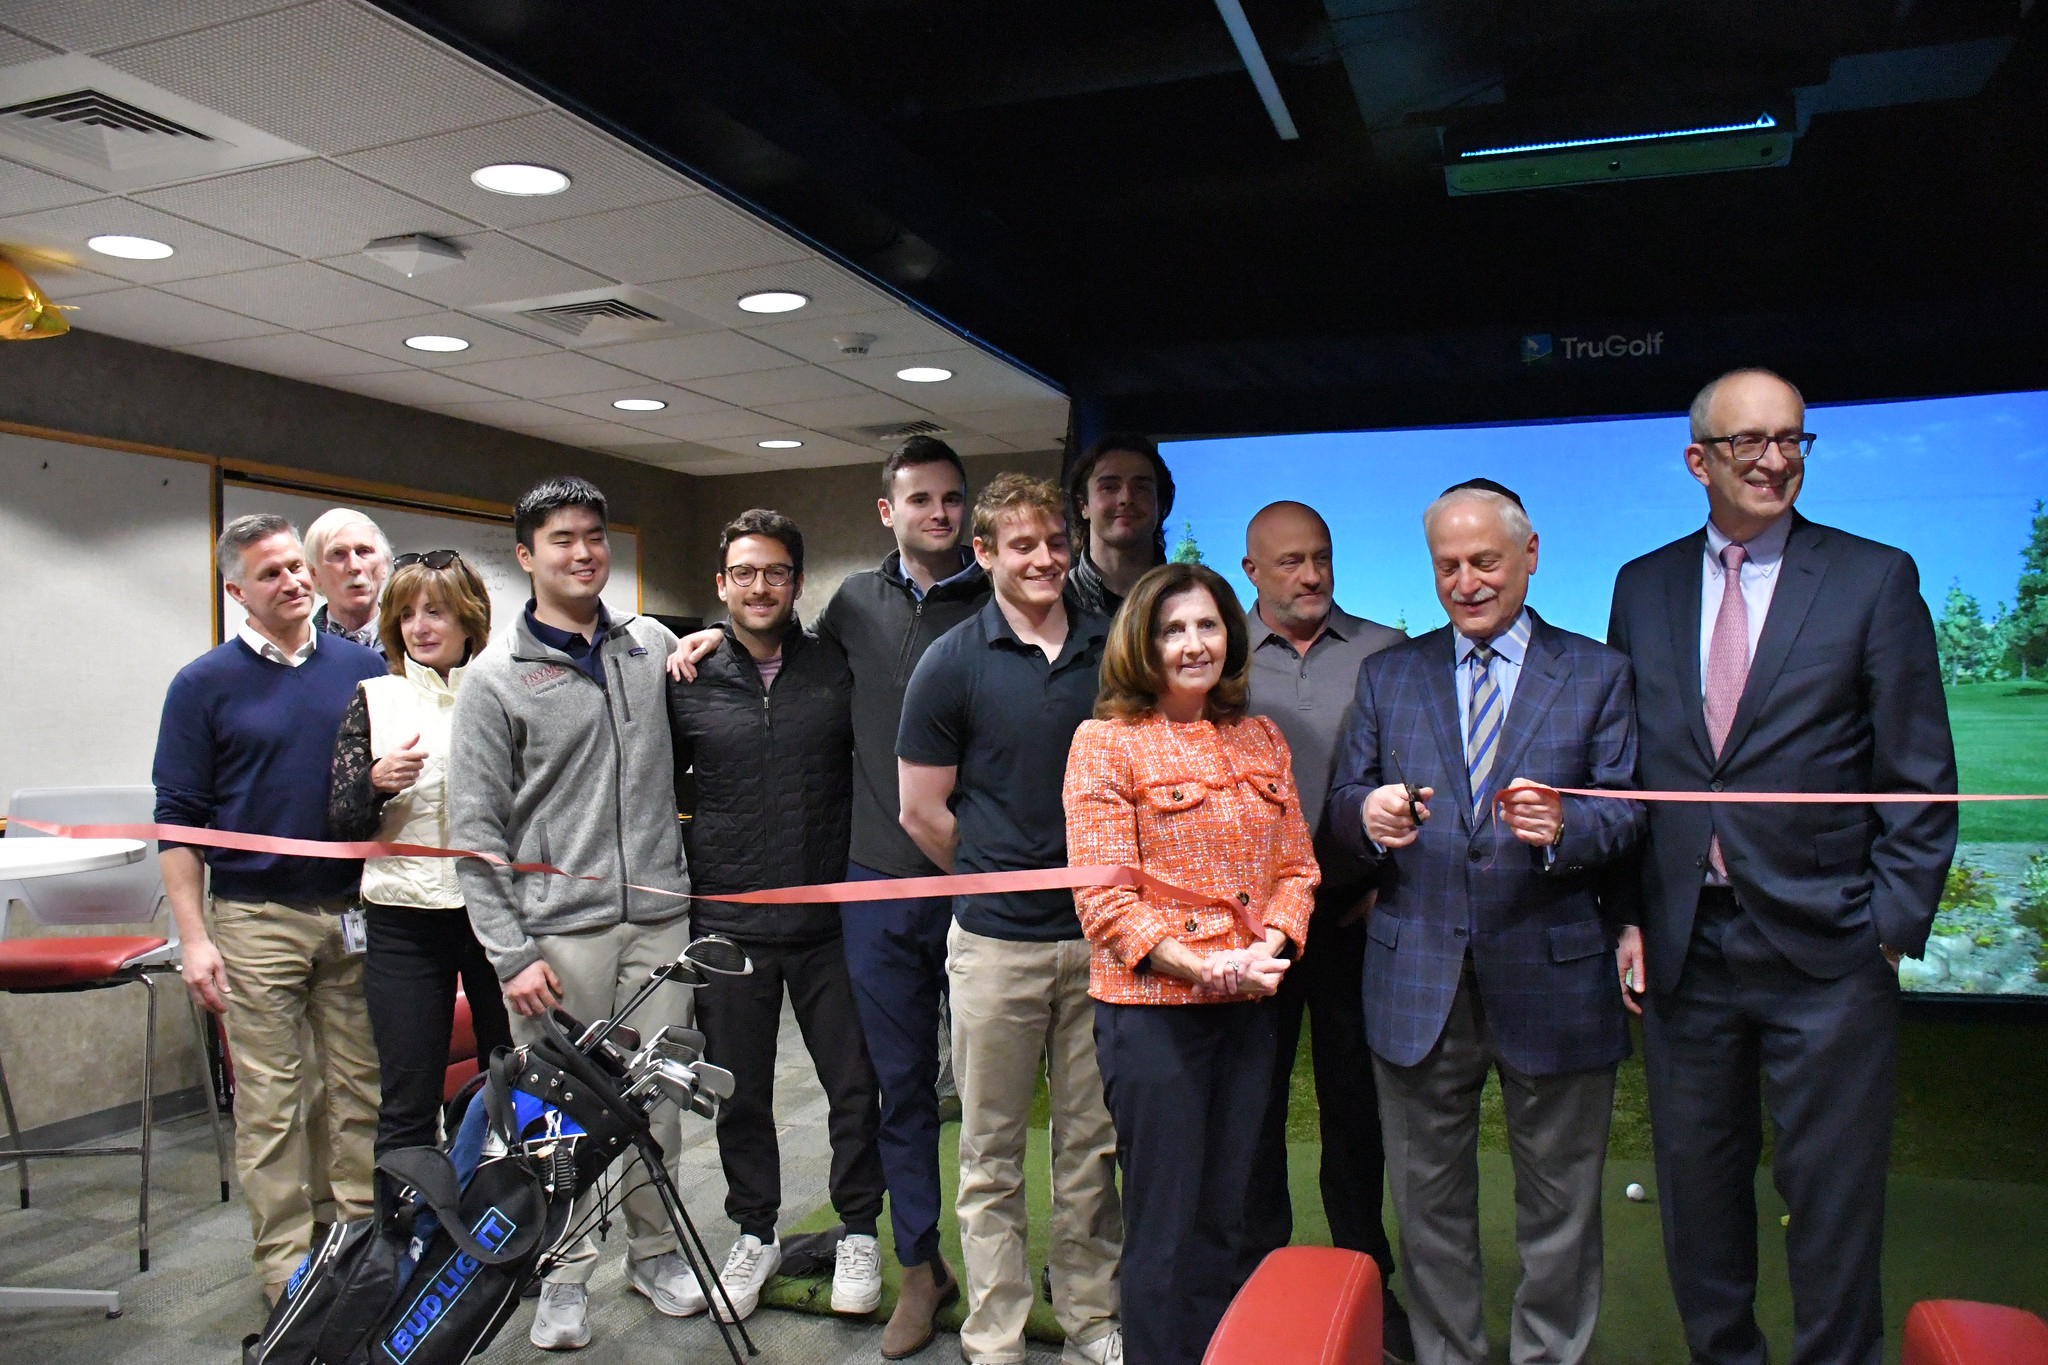 The NYMC community gathering for the golf simulator ribbon cutting event.